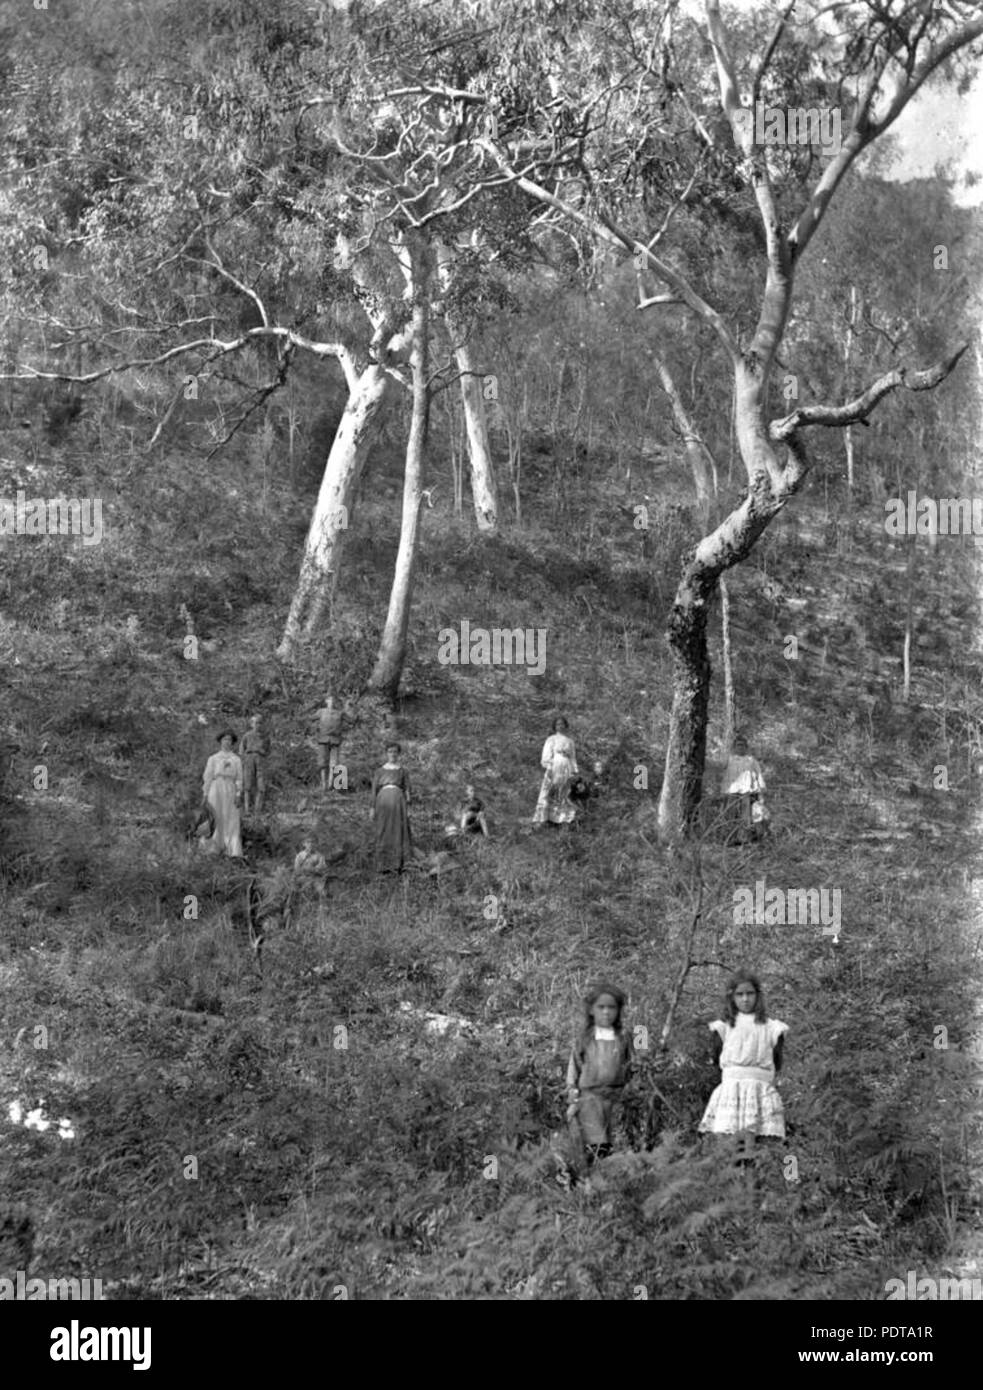 270 StateLibQld 1 67839 Byrne family at 'The Den' on Fraser Island, Queensland, ca. 1910 Stock Photo